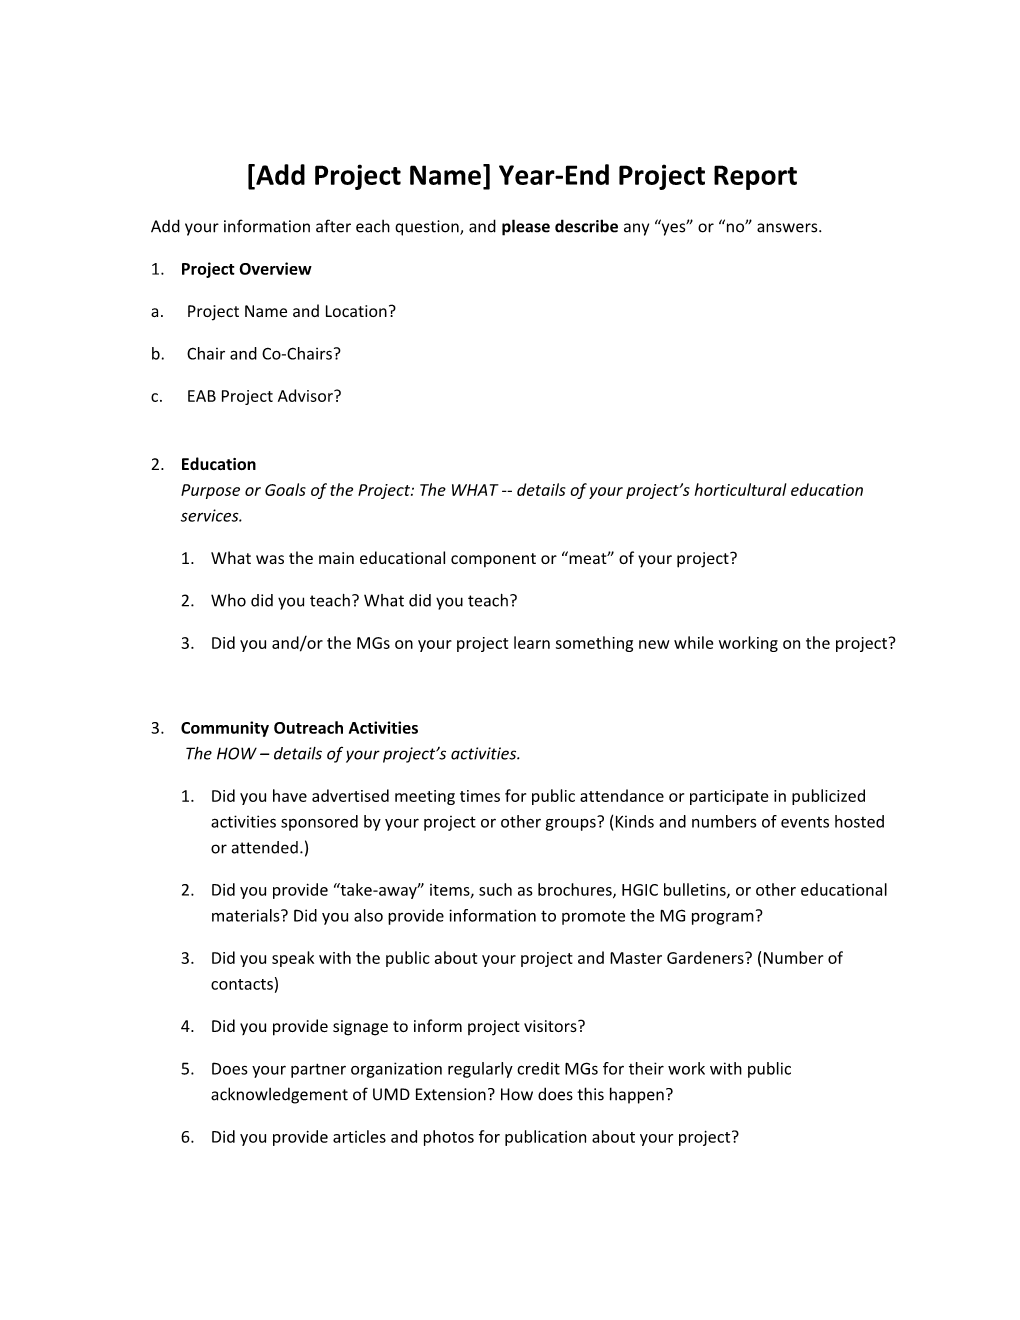 Add Project Name Year-End Project Report